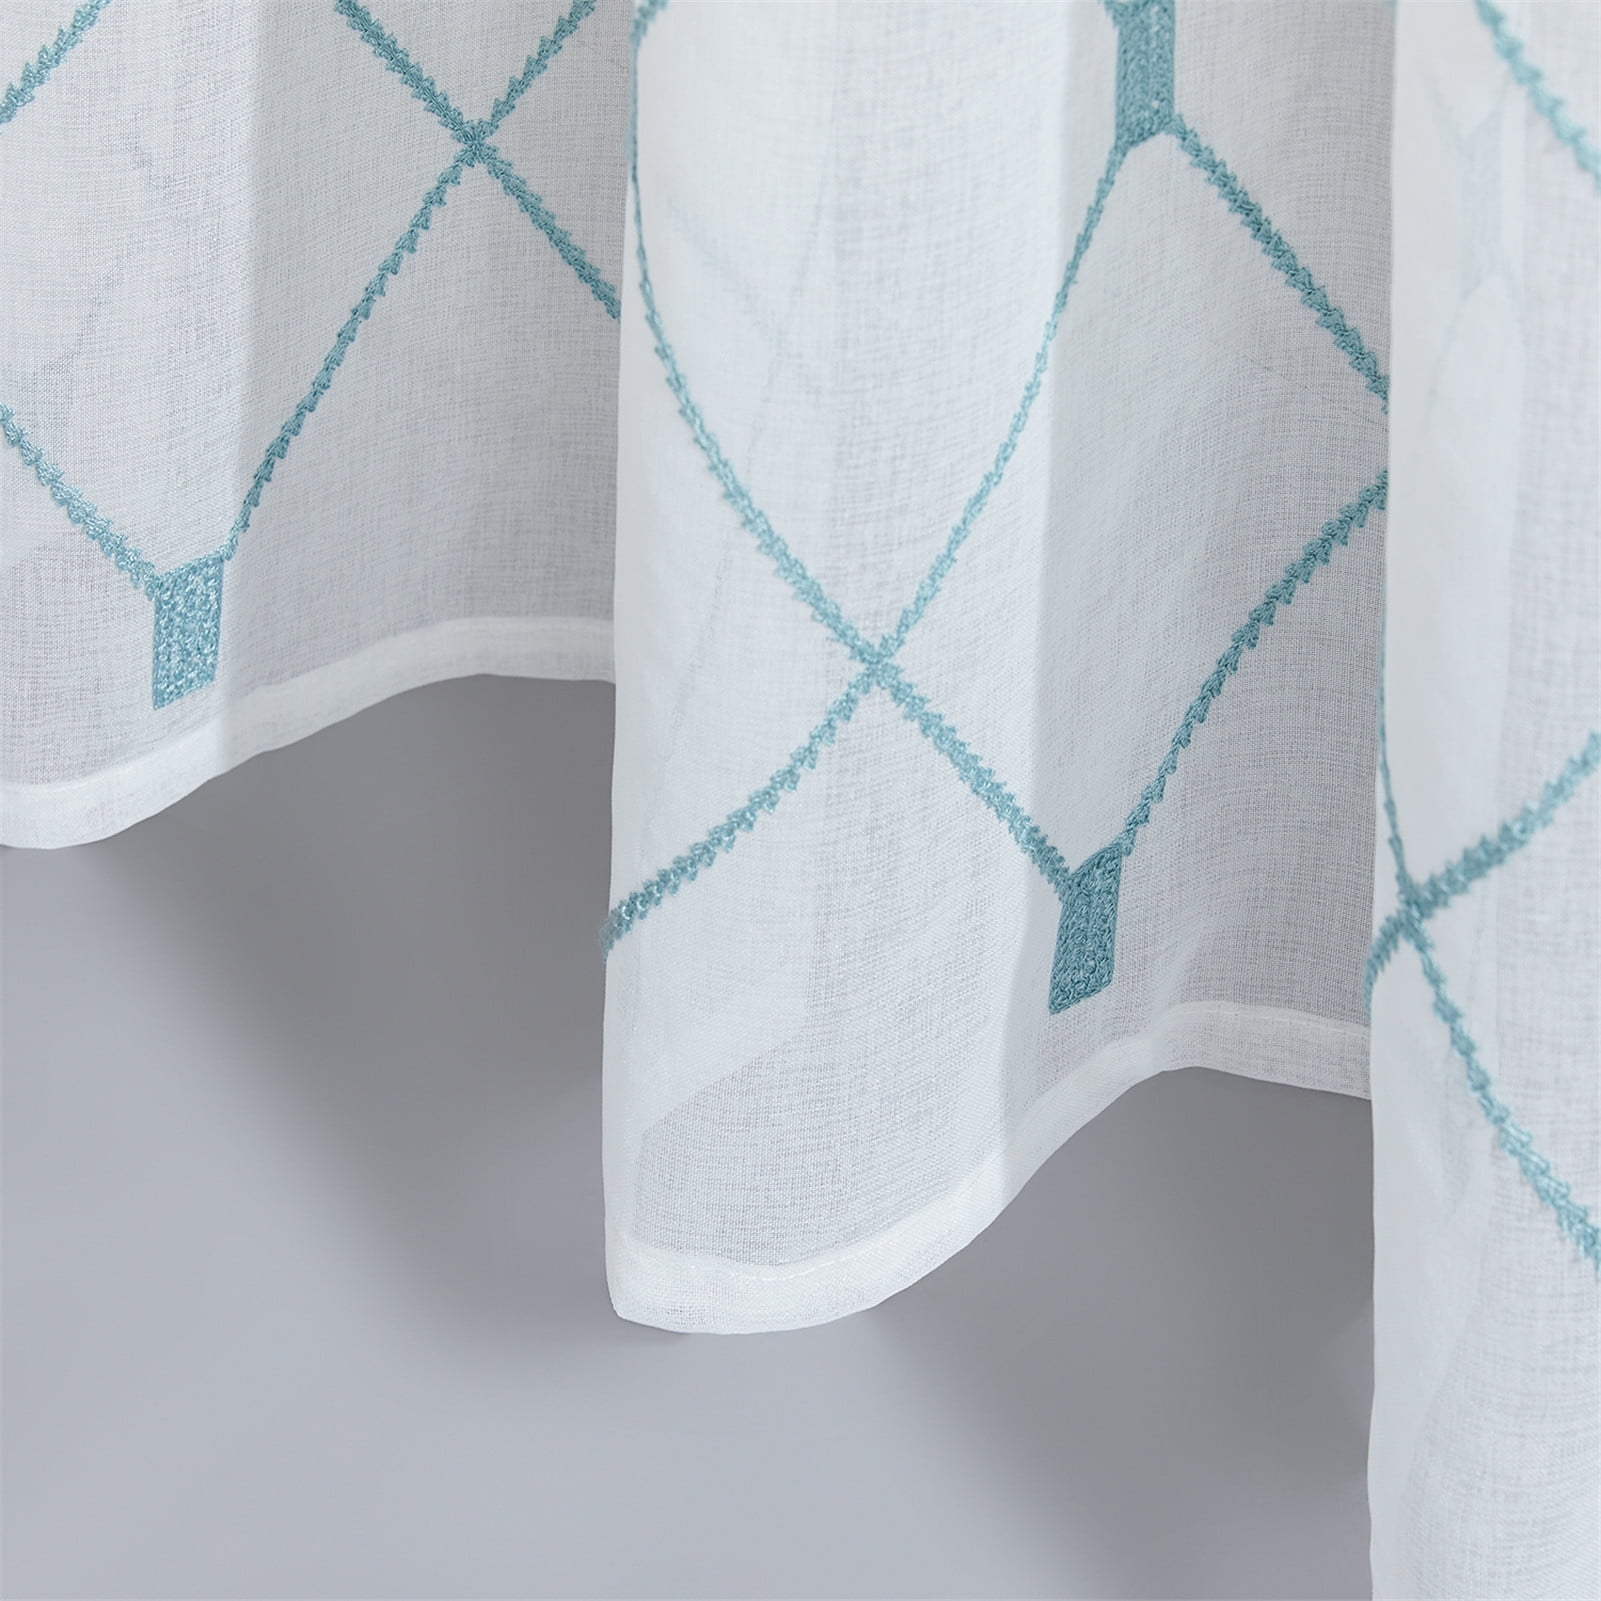 Sheer Window Curtain abstract blue background with transparent white parchment  squares with linen style texture or brush strokes layered in random pattern  with geometric angles and shapes 